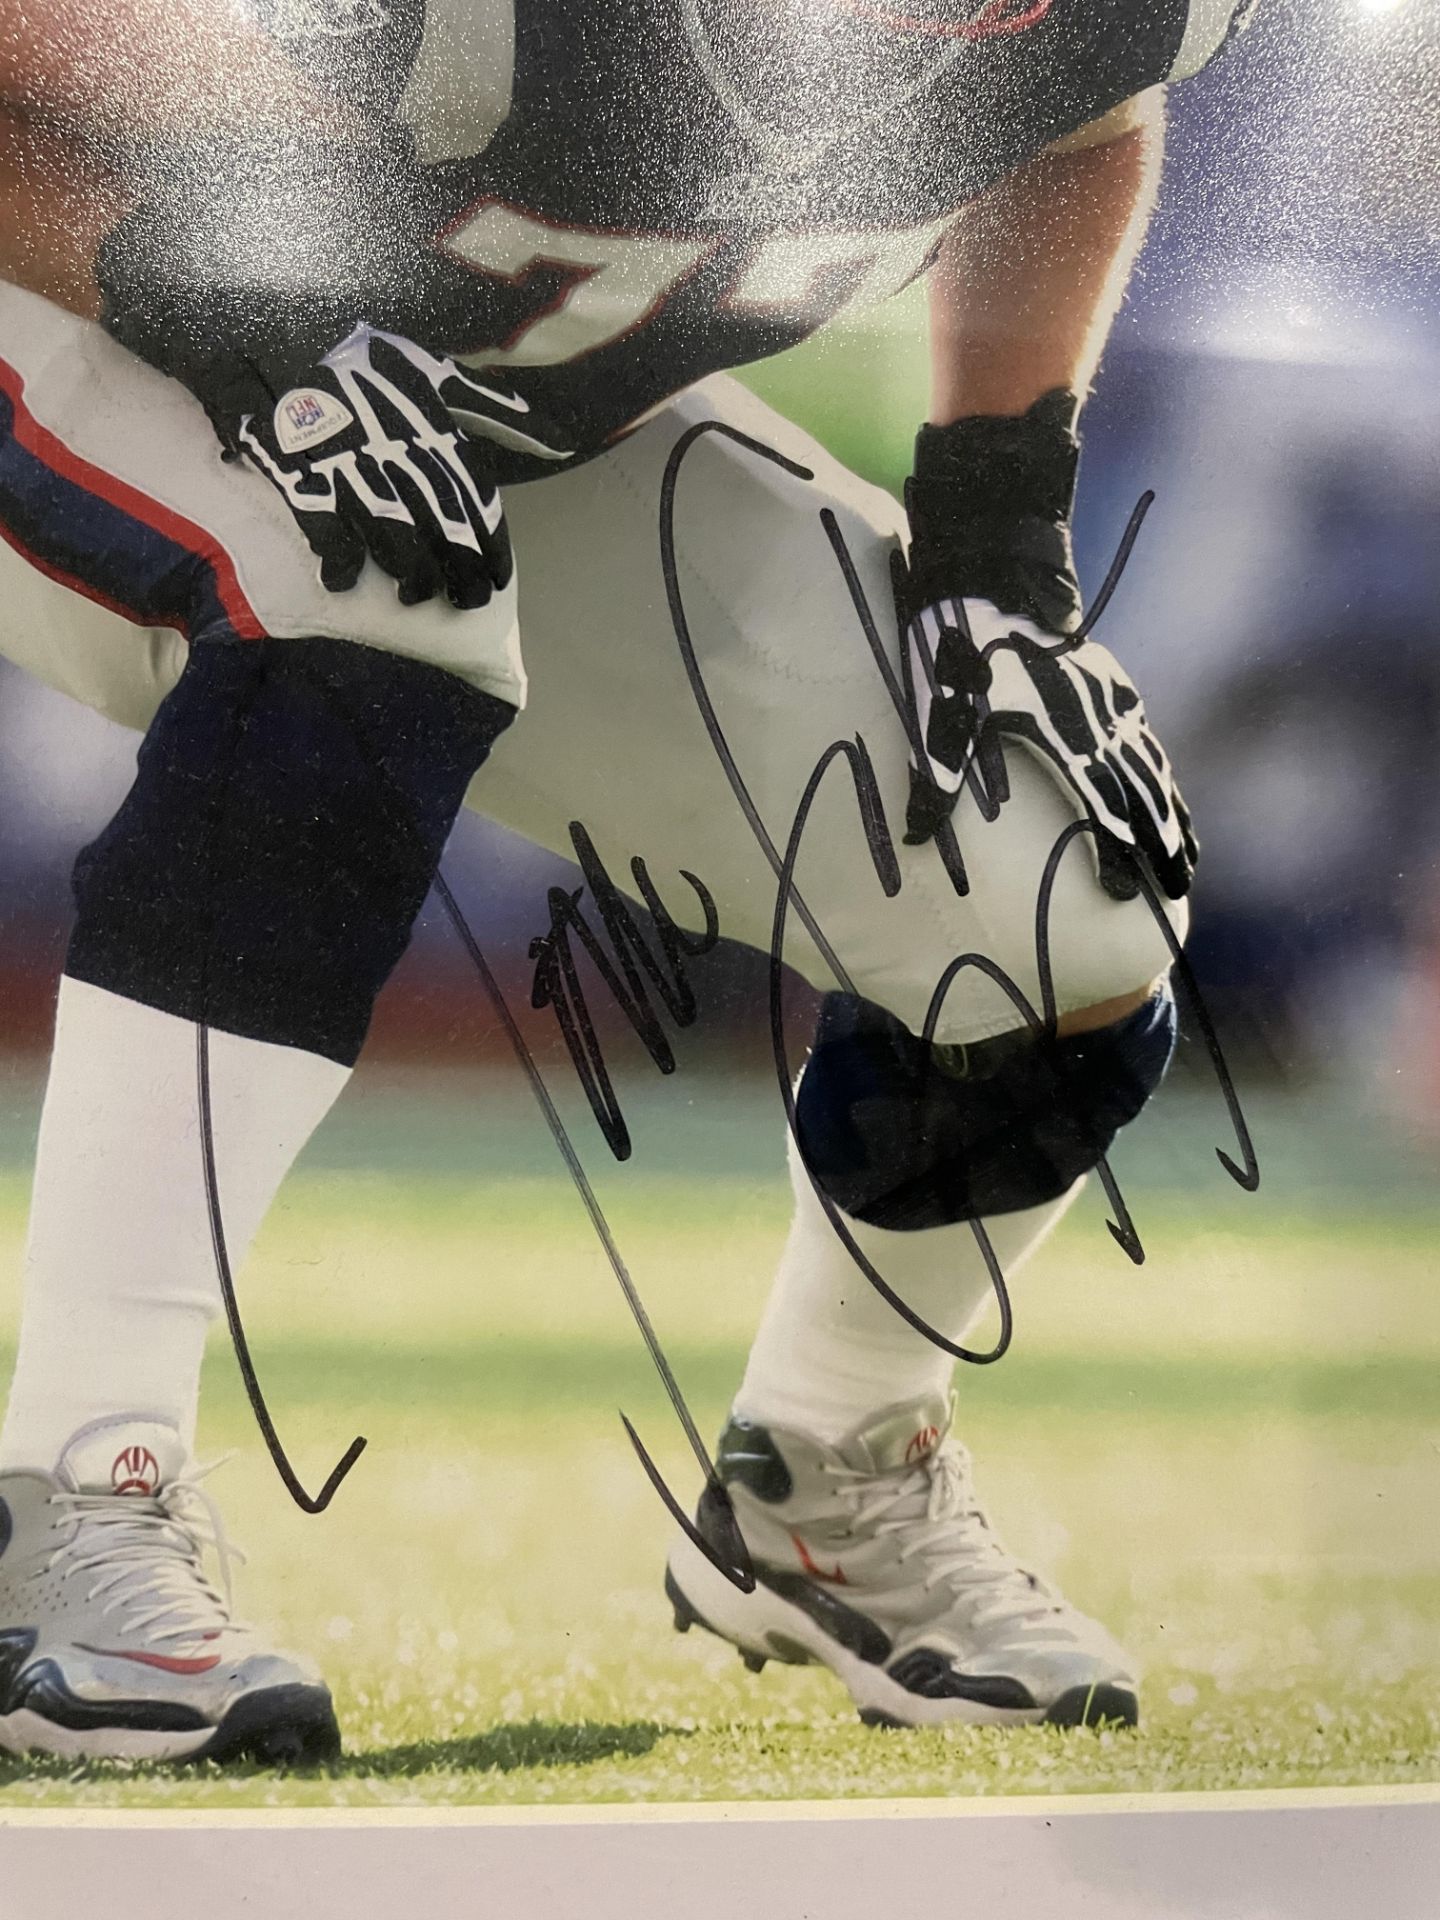 Patriots Player Nate Solder #77 Signed Photo 11"x14" - Image 2 of 2